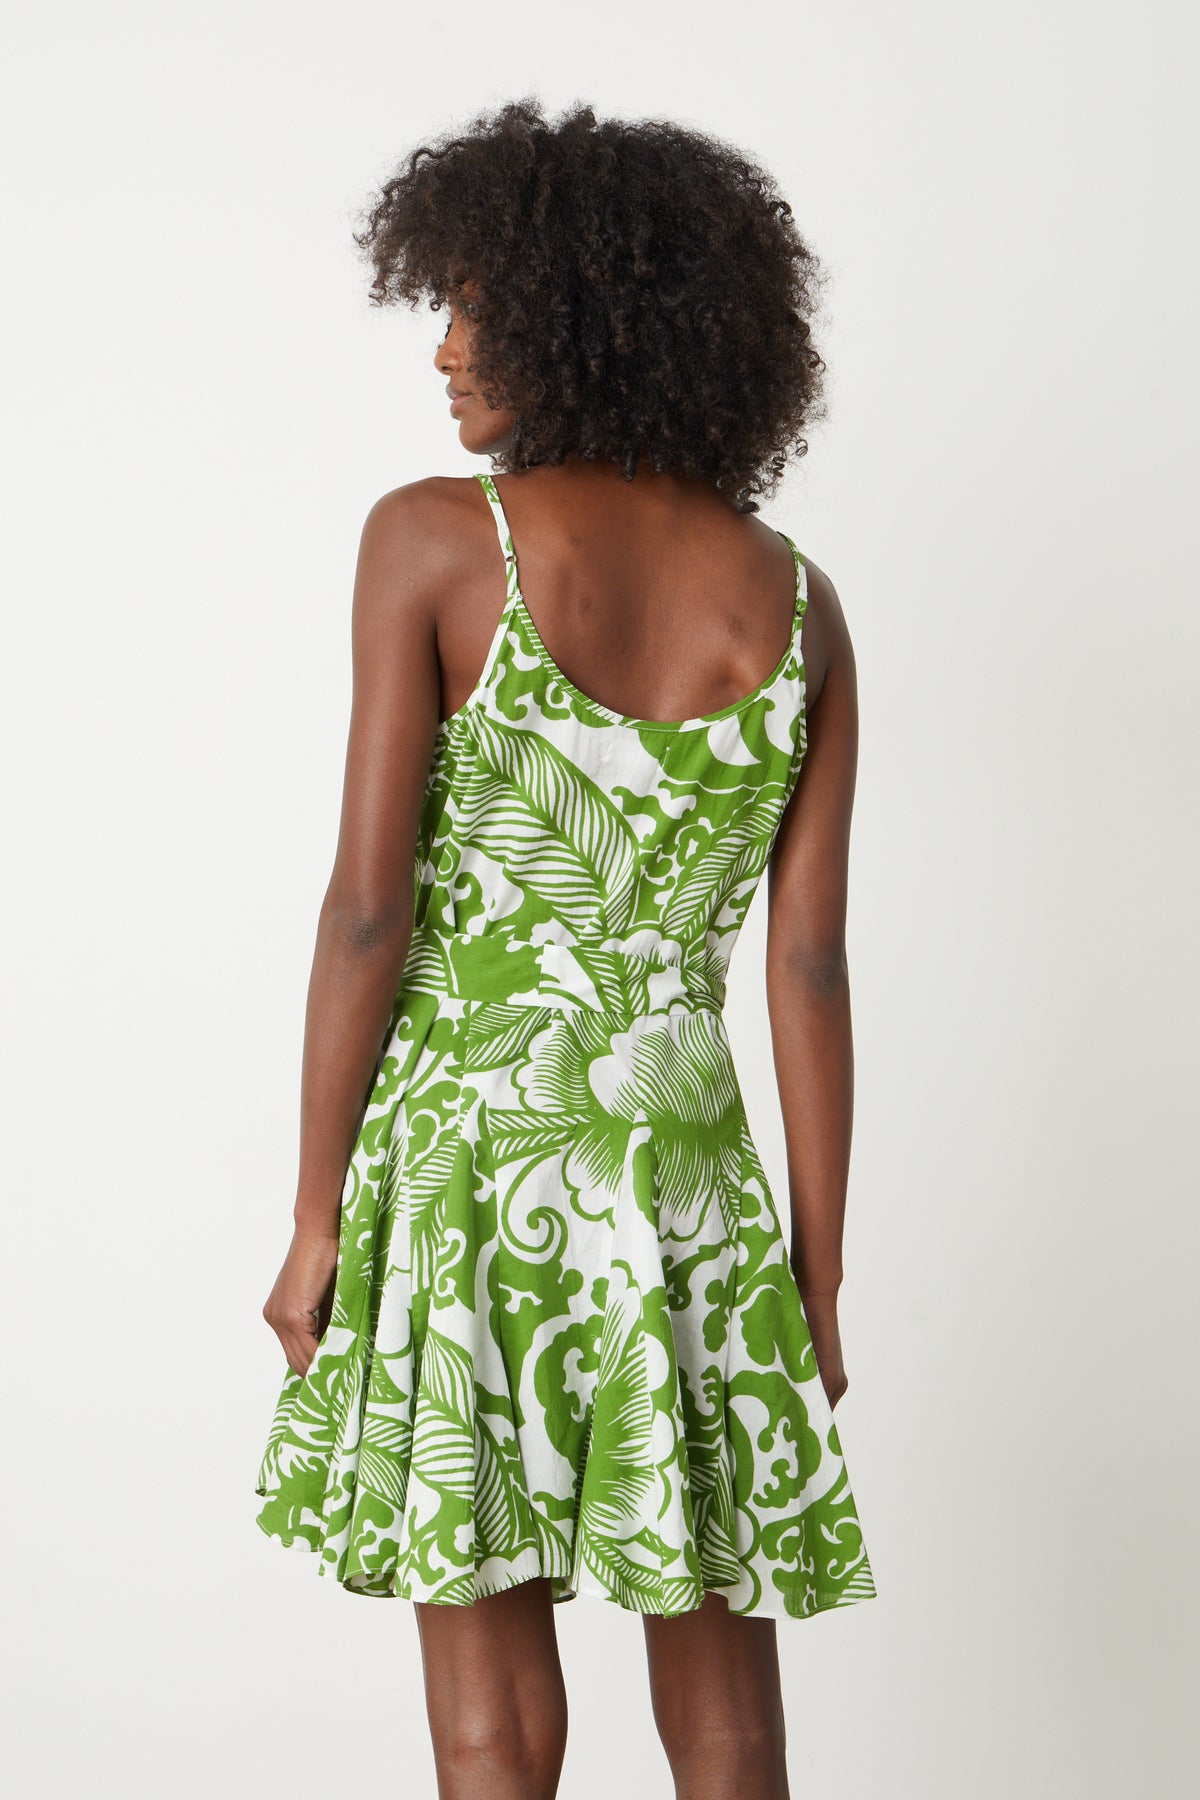 The back view of a woman wearing a Velvet by Graham & Spencer VIVIAN PRINTED DRESS.-26774913515713